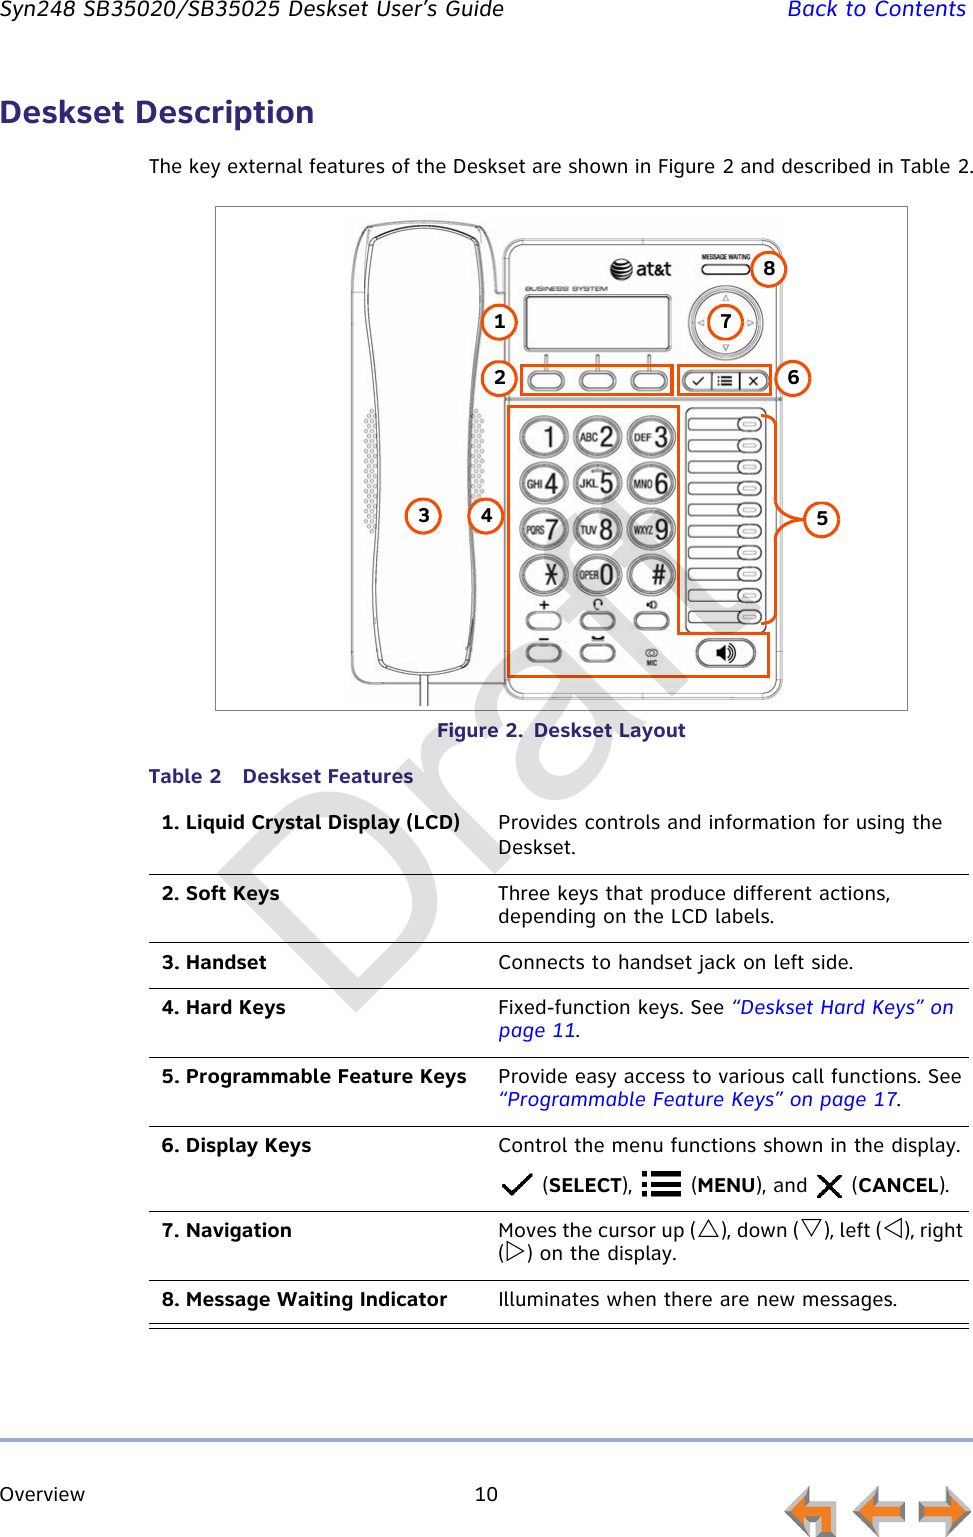 Overview 10         Syn248 SB35020/SB35025 Deskset User’s Guide Back to ContentsDeskset DescriptionThe key external features of the Deskset are shown in Figure 2 and described in Table 2.Figure 2.  Deskset LayoutTable 2  Deskset Features1. Liquid Crystal Display (LCD) Provides controls and information for using the Deskset.2. Soft Keys Three keys that produce different actions, depending on the LCD labels. 3. Handset Connects to handset jack on left side.4. Hard Keys Fixed-function keys. See “Deskset Hard Keys” on page 11.5. Programmable Feature Keys Provide easy access to various call functions. See “Programmable Feature Keys” on page 17.6. Display Keys Control the menu functions shown in the display. (SELECT),  (MENU), and   (CANCEL).7. Navigation Moves the cursor up (), down (), left (), right () on the display.8. Message Waiting Indicator Illuminates when there are new messages.1243 5678Draft